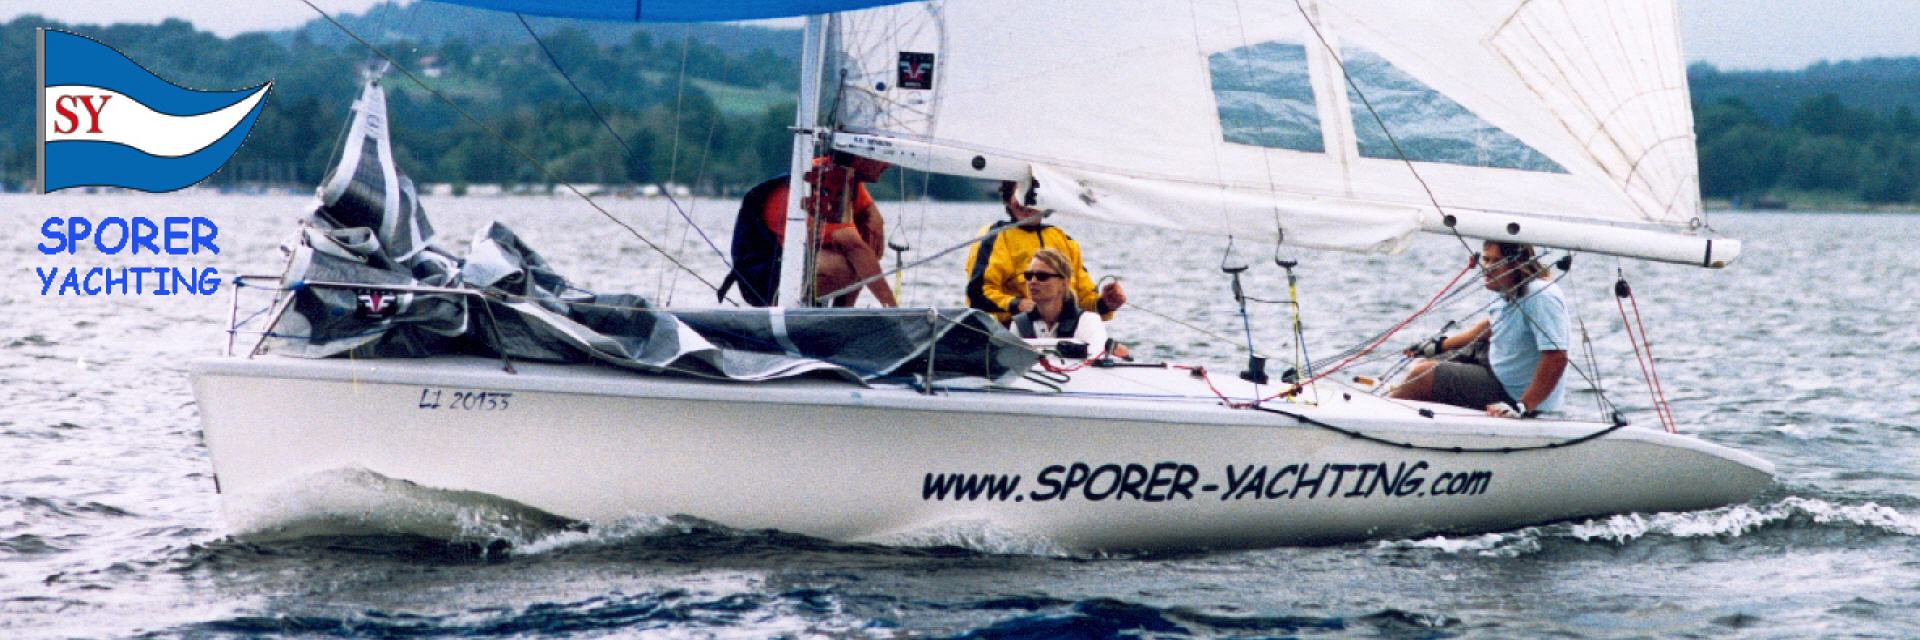 yacht charter bodensee